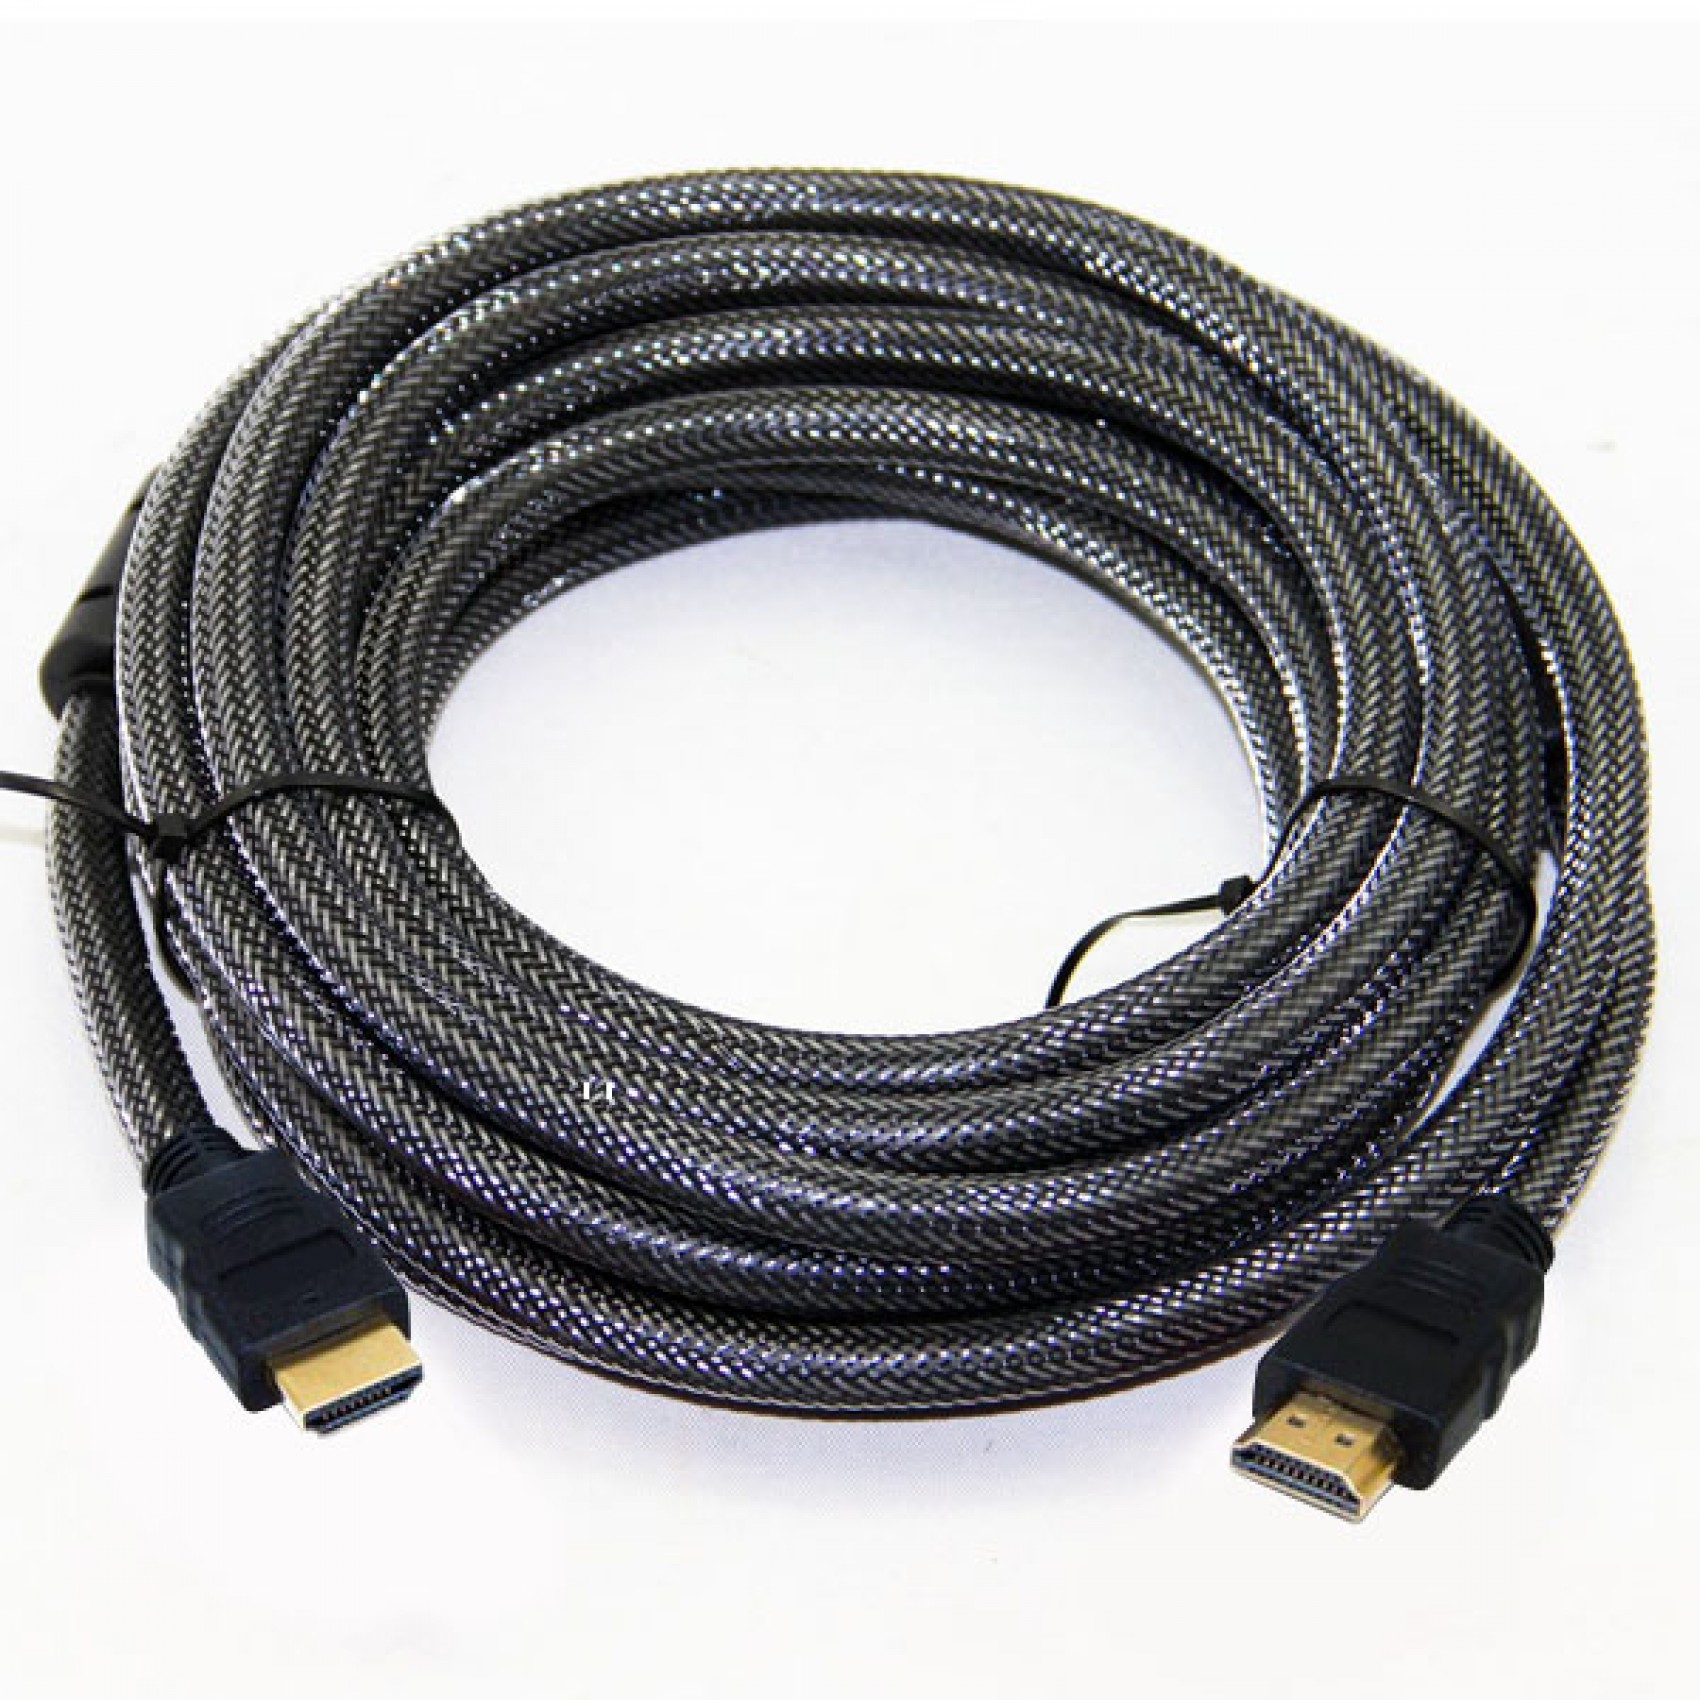 Acetek cable hdmi male to hdmi male 10 meters